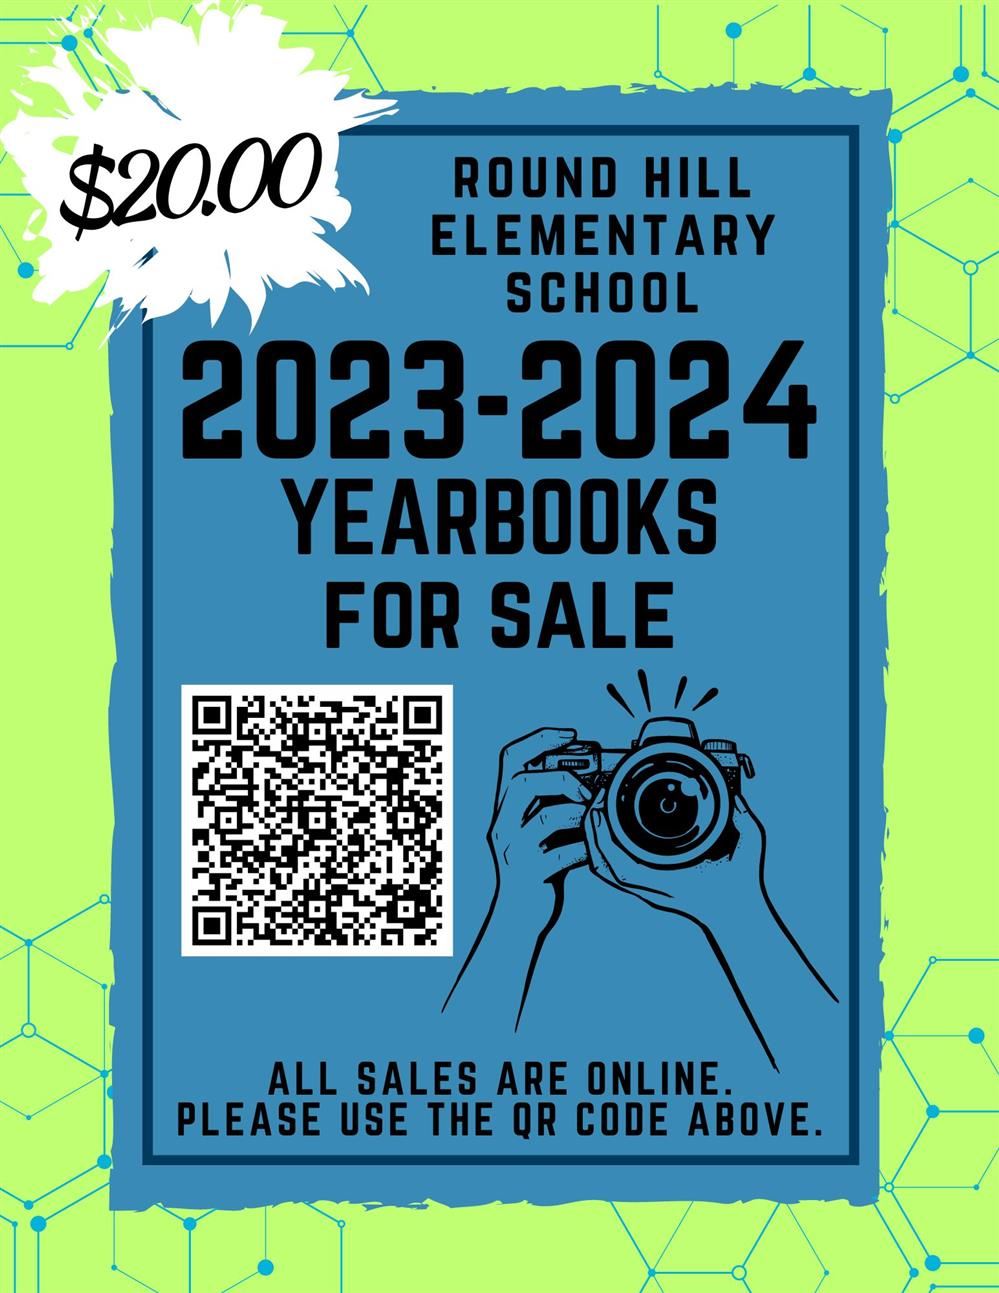  $20.00 Round Hill Elementary School 2023-2024 YEARBOOKS for sale.  ALL SALES ARE ONLINE. 